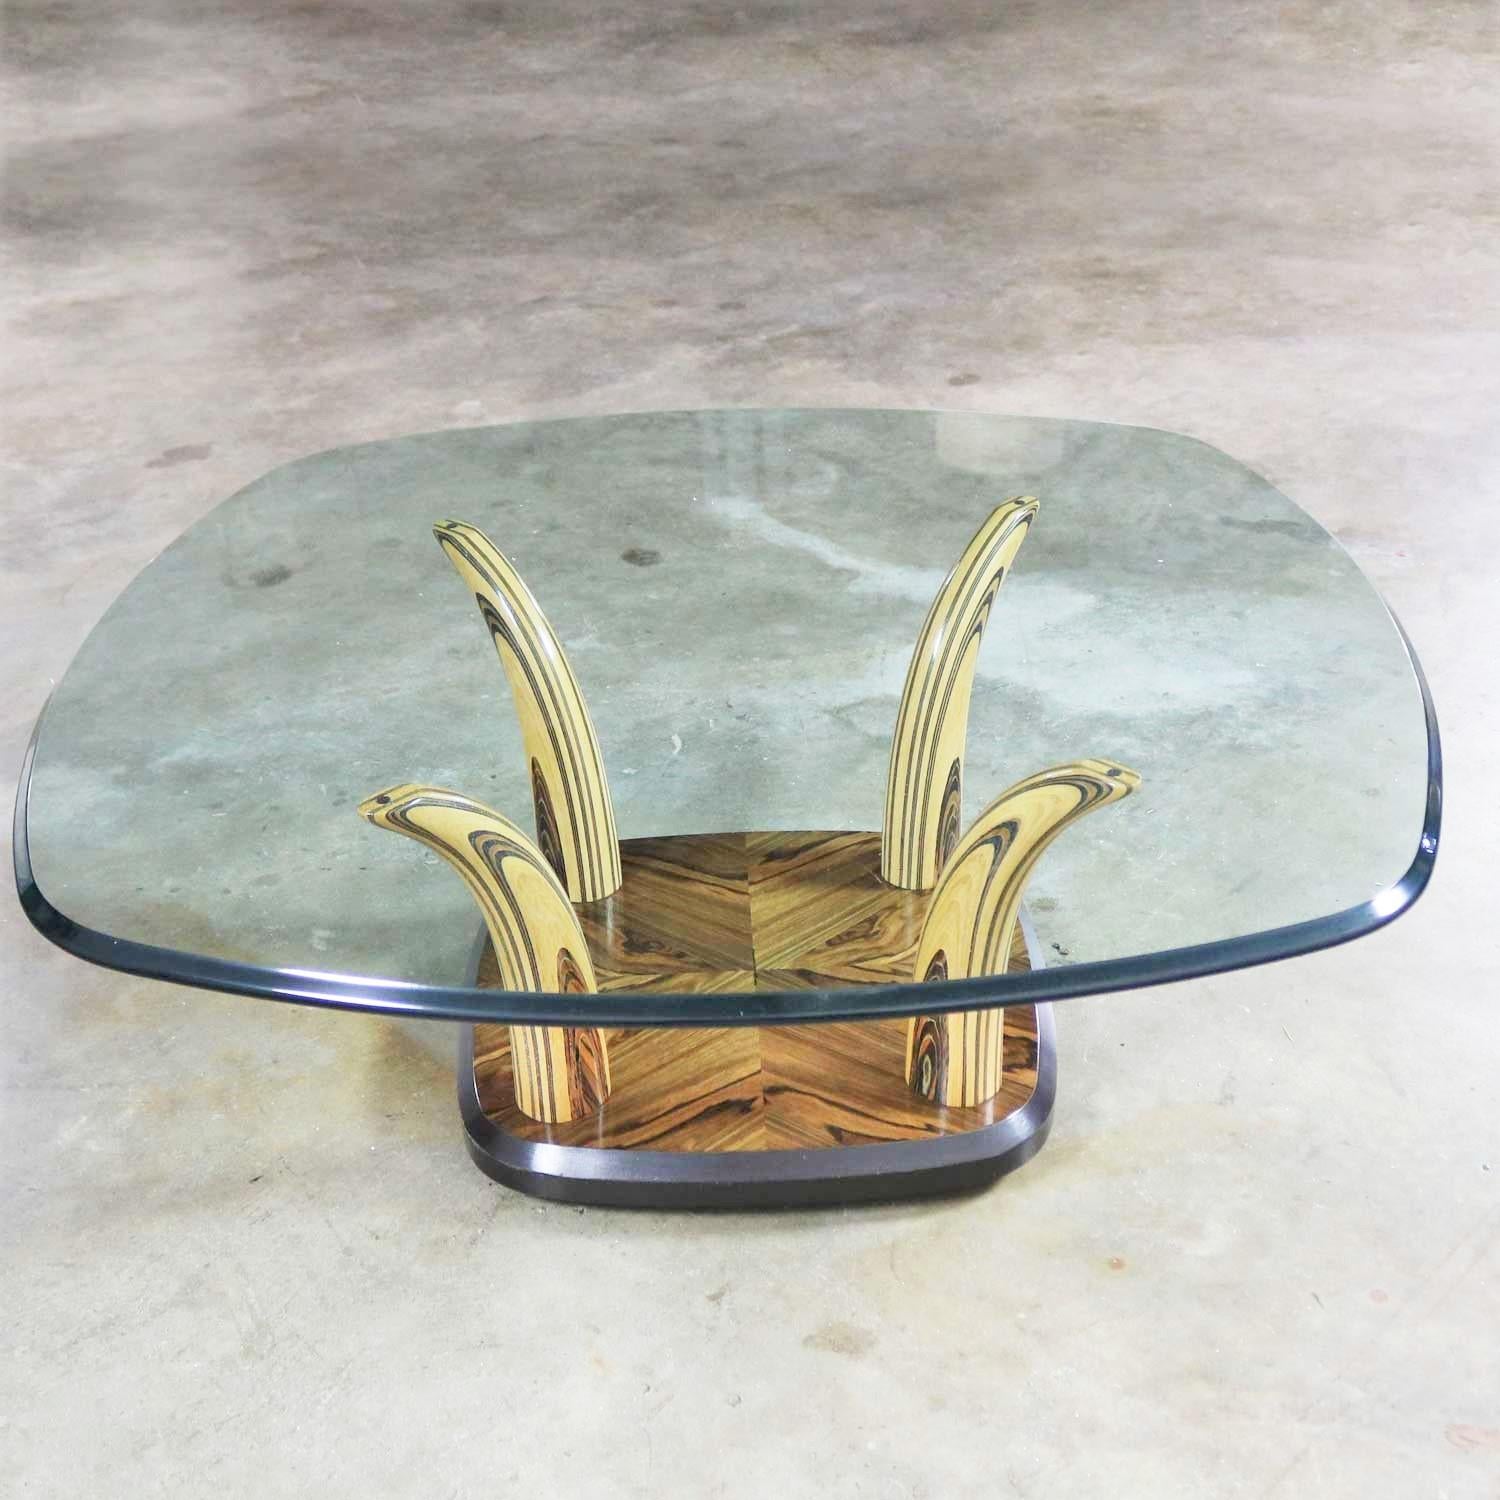 Hollywood Regency Henredon Zebra Wood Faux Tusk Coffee or Cocktail Table with Glass Top